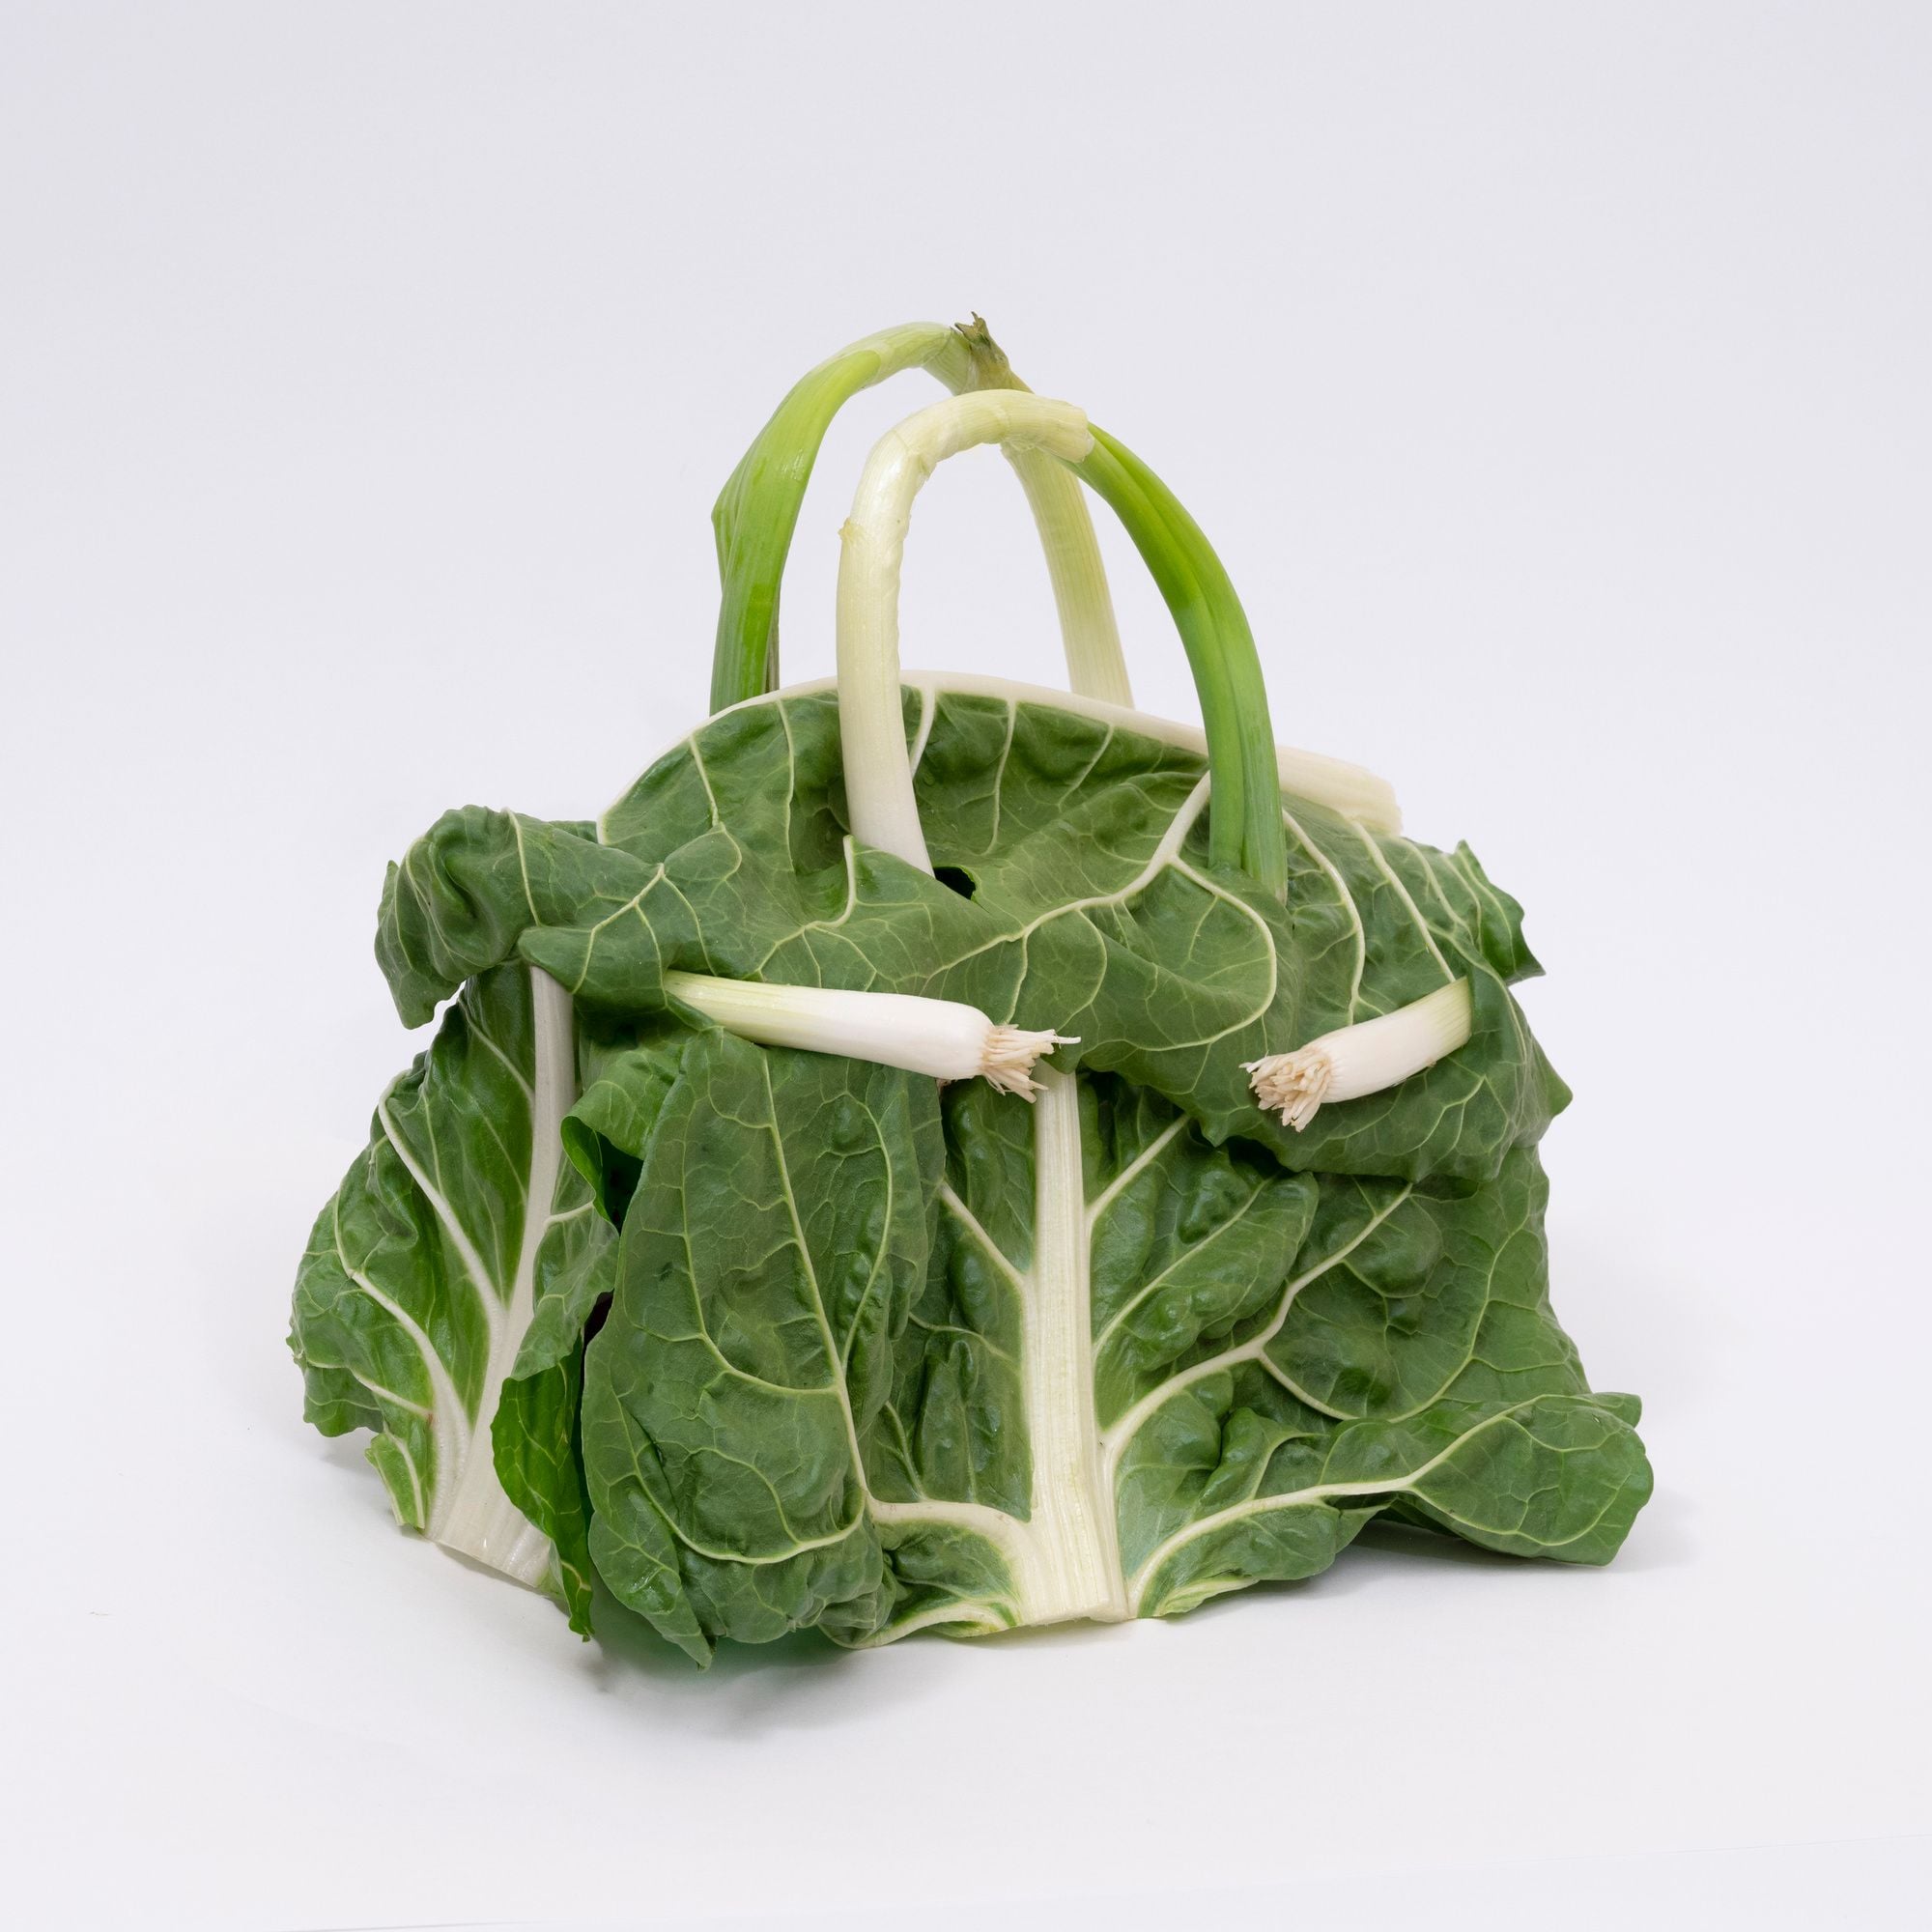 An all-cabbage version of luxury fashion brand Hermes' iconic 